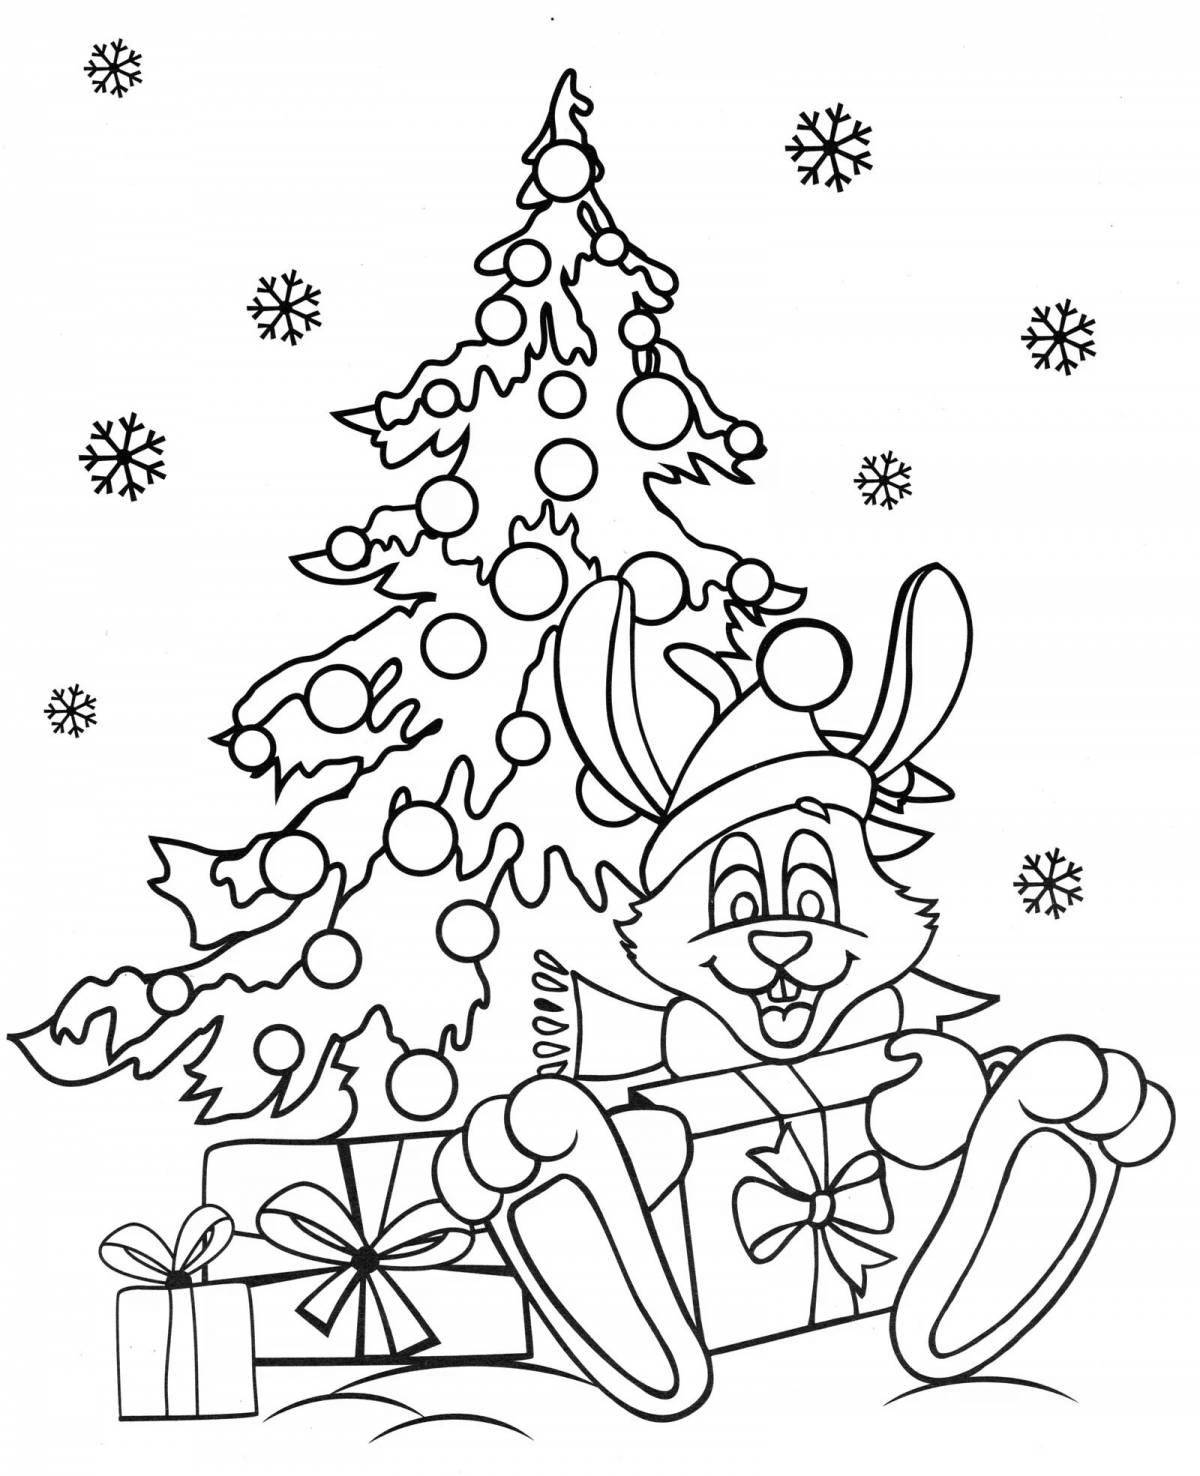 Living hare new year 2023 coloring book